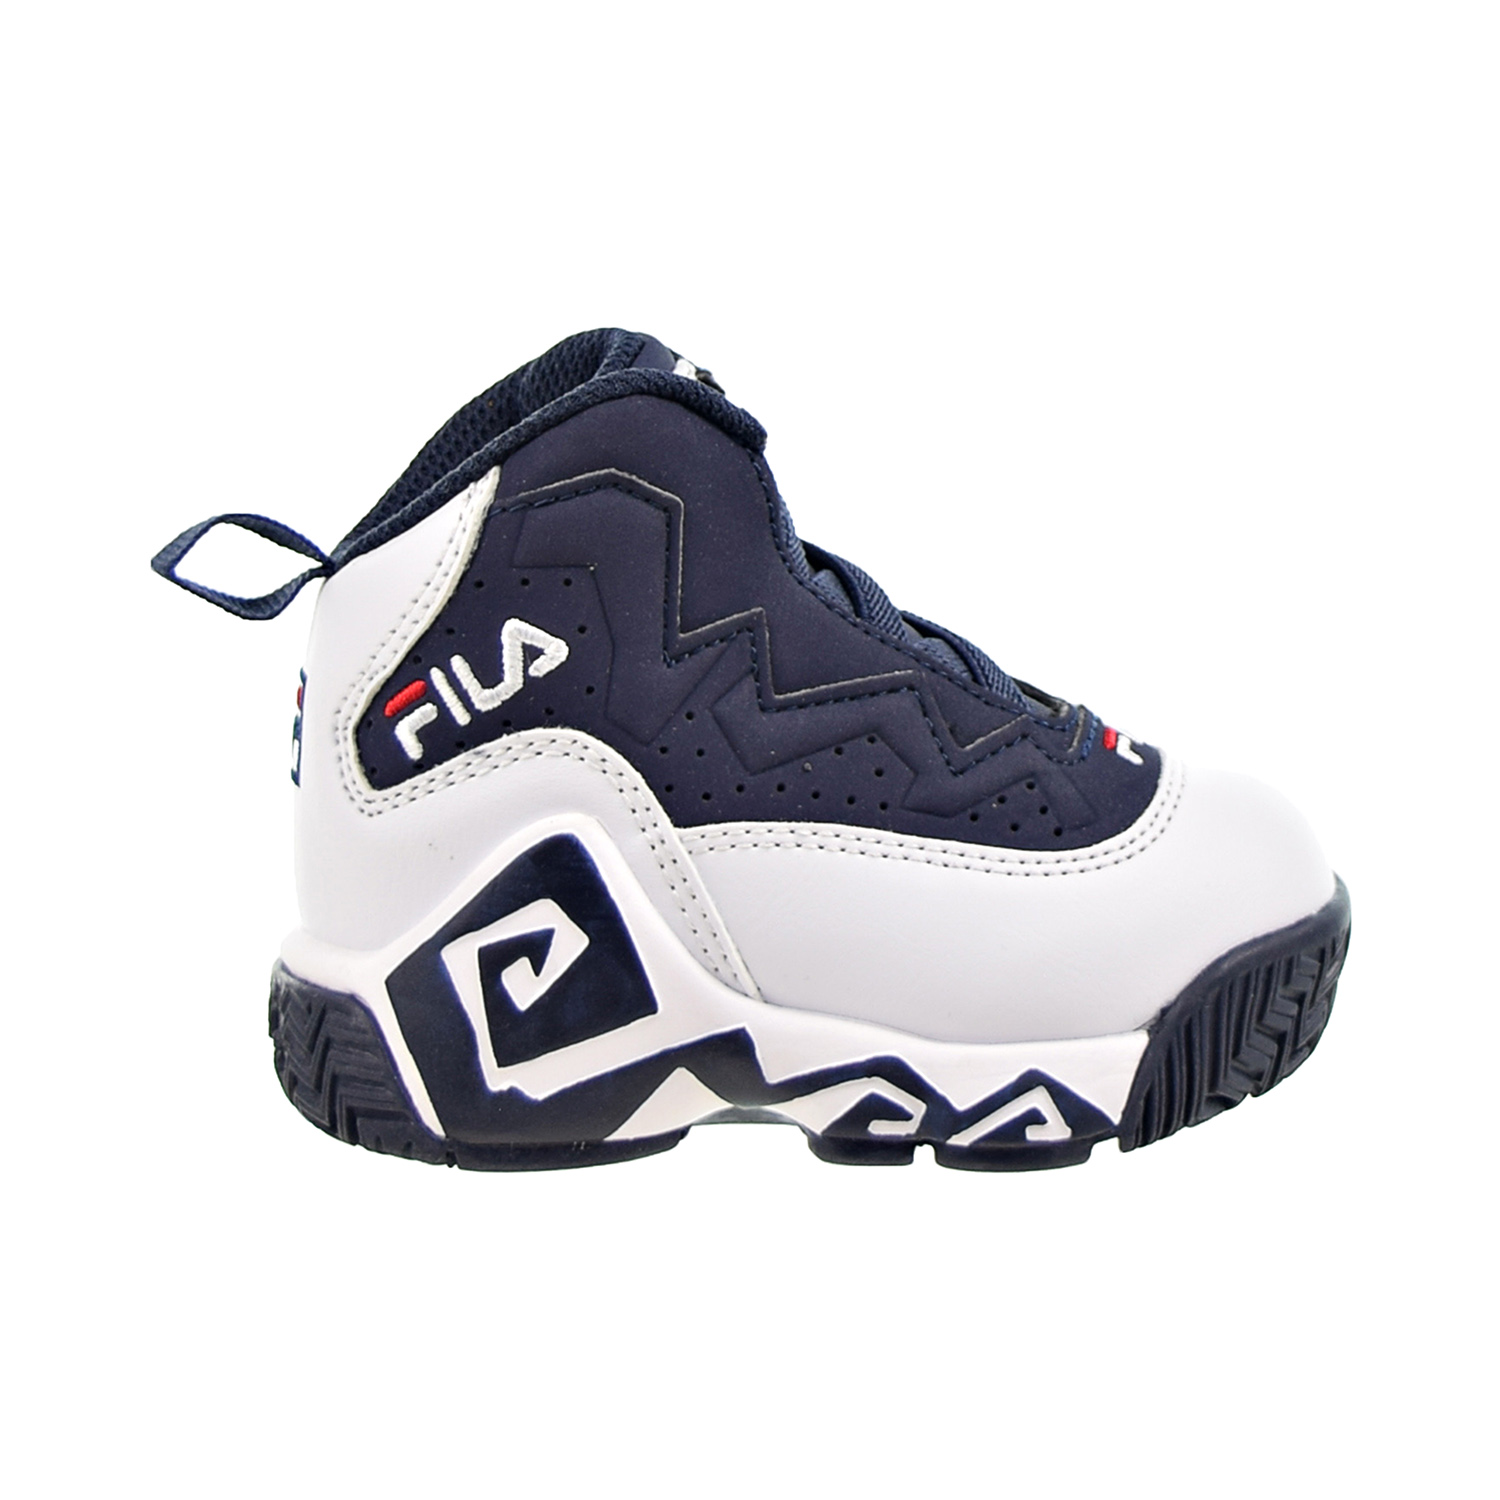 Fila Toddlers' Shoes White-Navy-Red 7bm01248-125